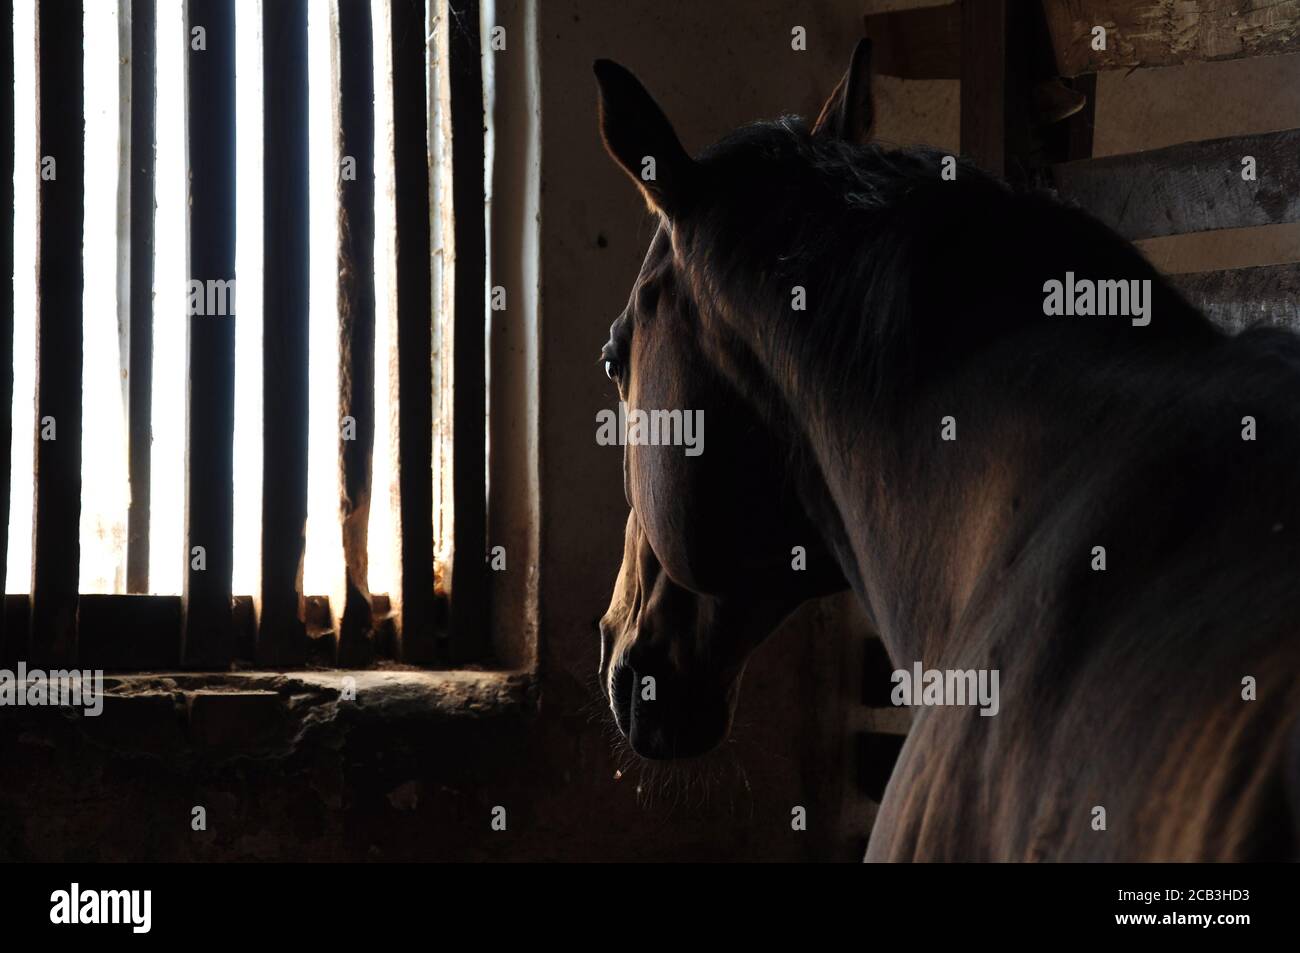 The brown horse in the stable sadly looks out of the barred window. Stock Photo